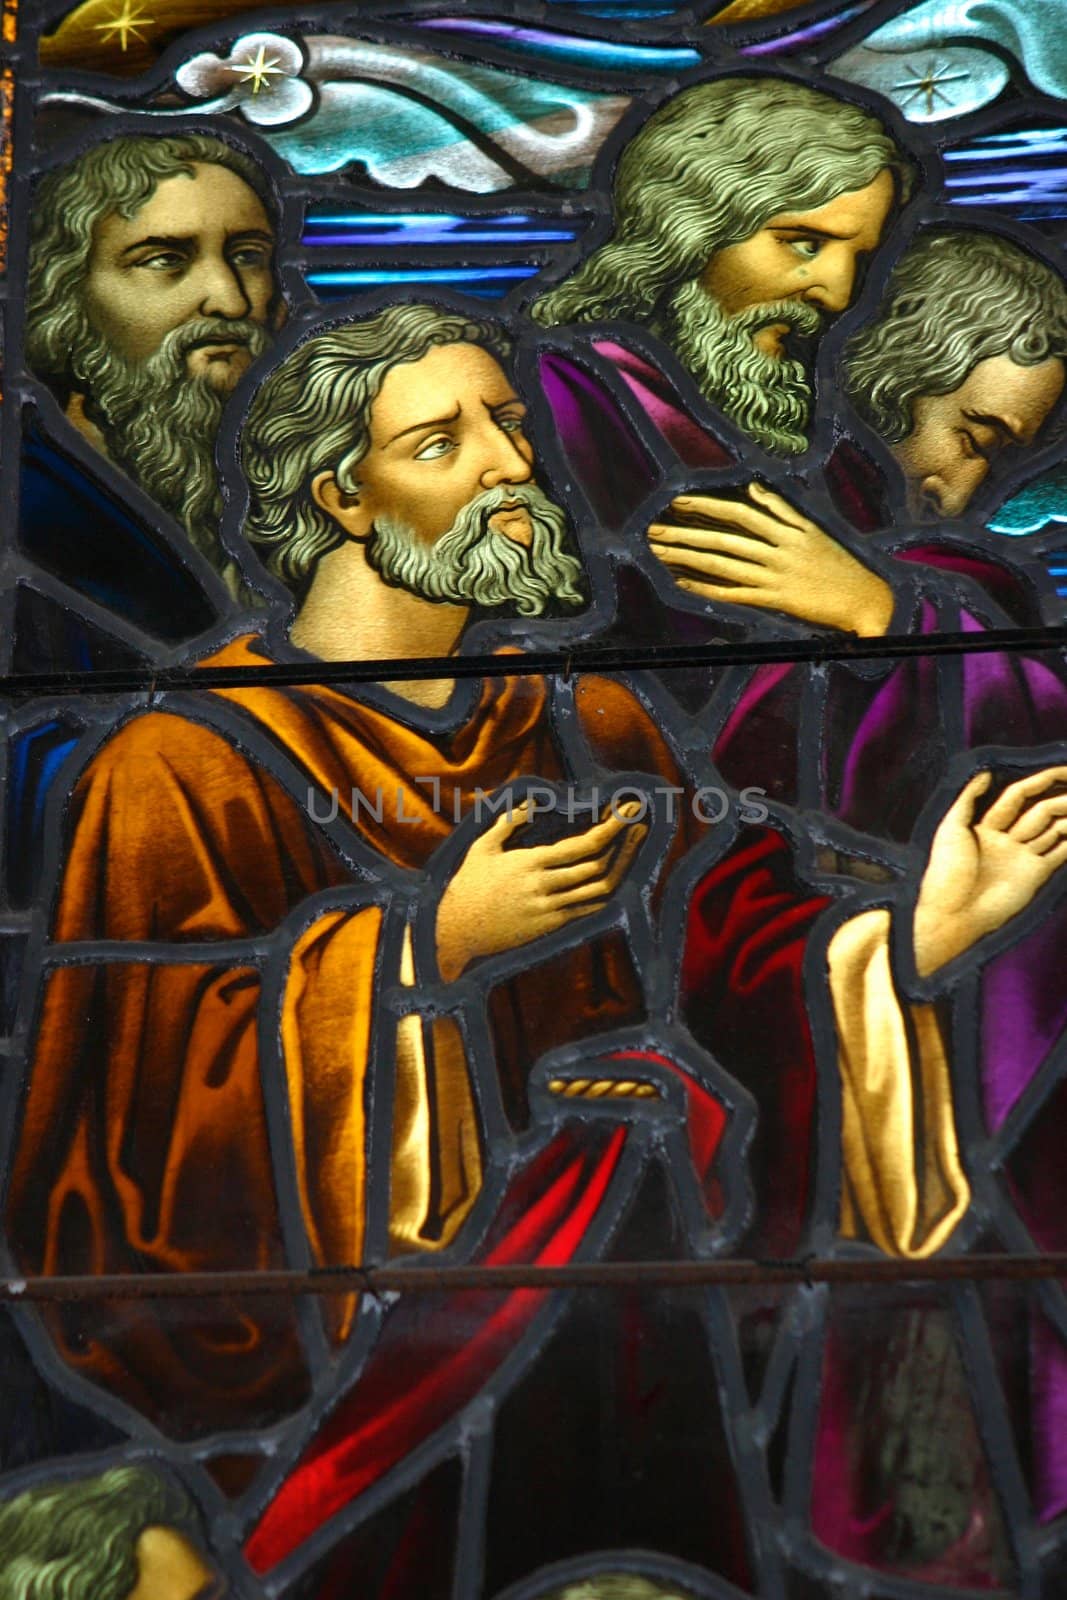 Staned glass window depicting apostles.  circa 1870-1900.  Window shows some age.